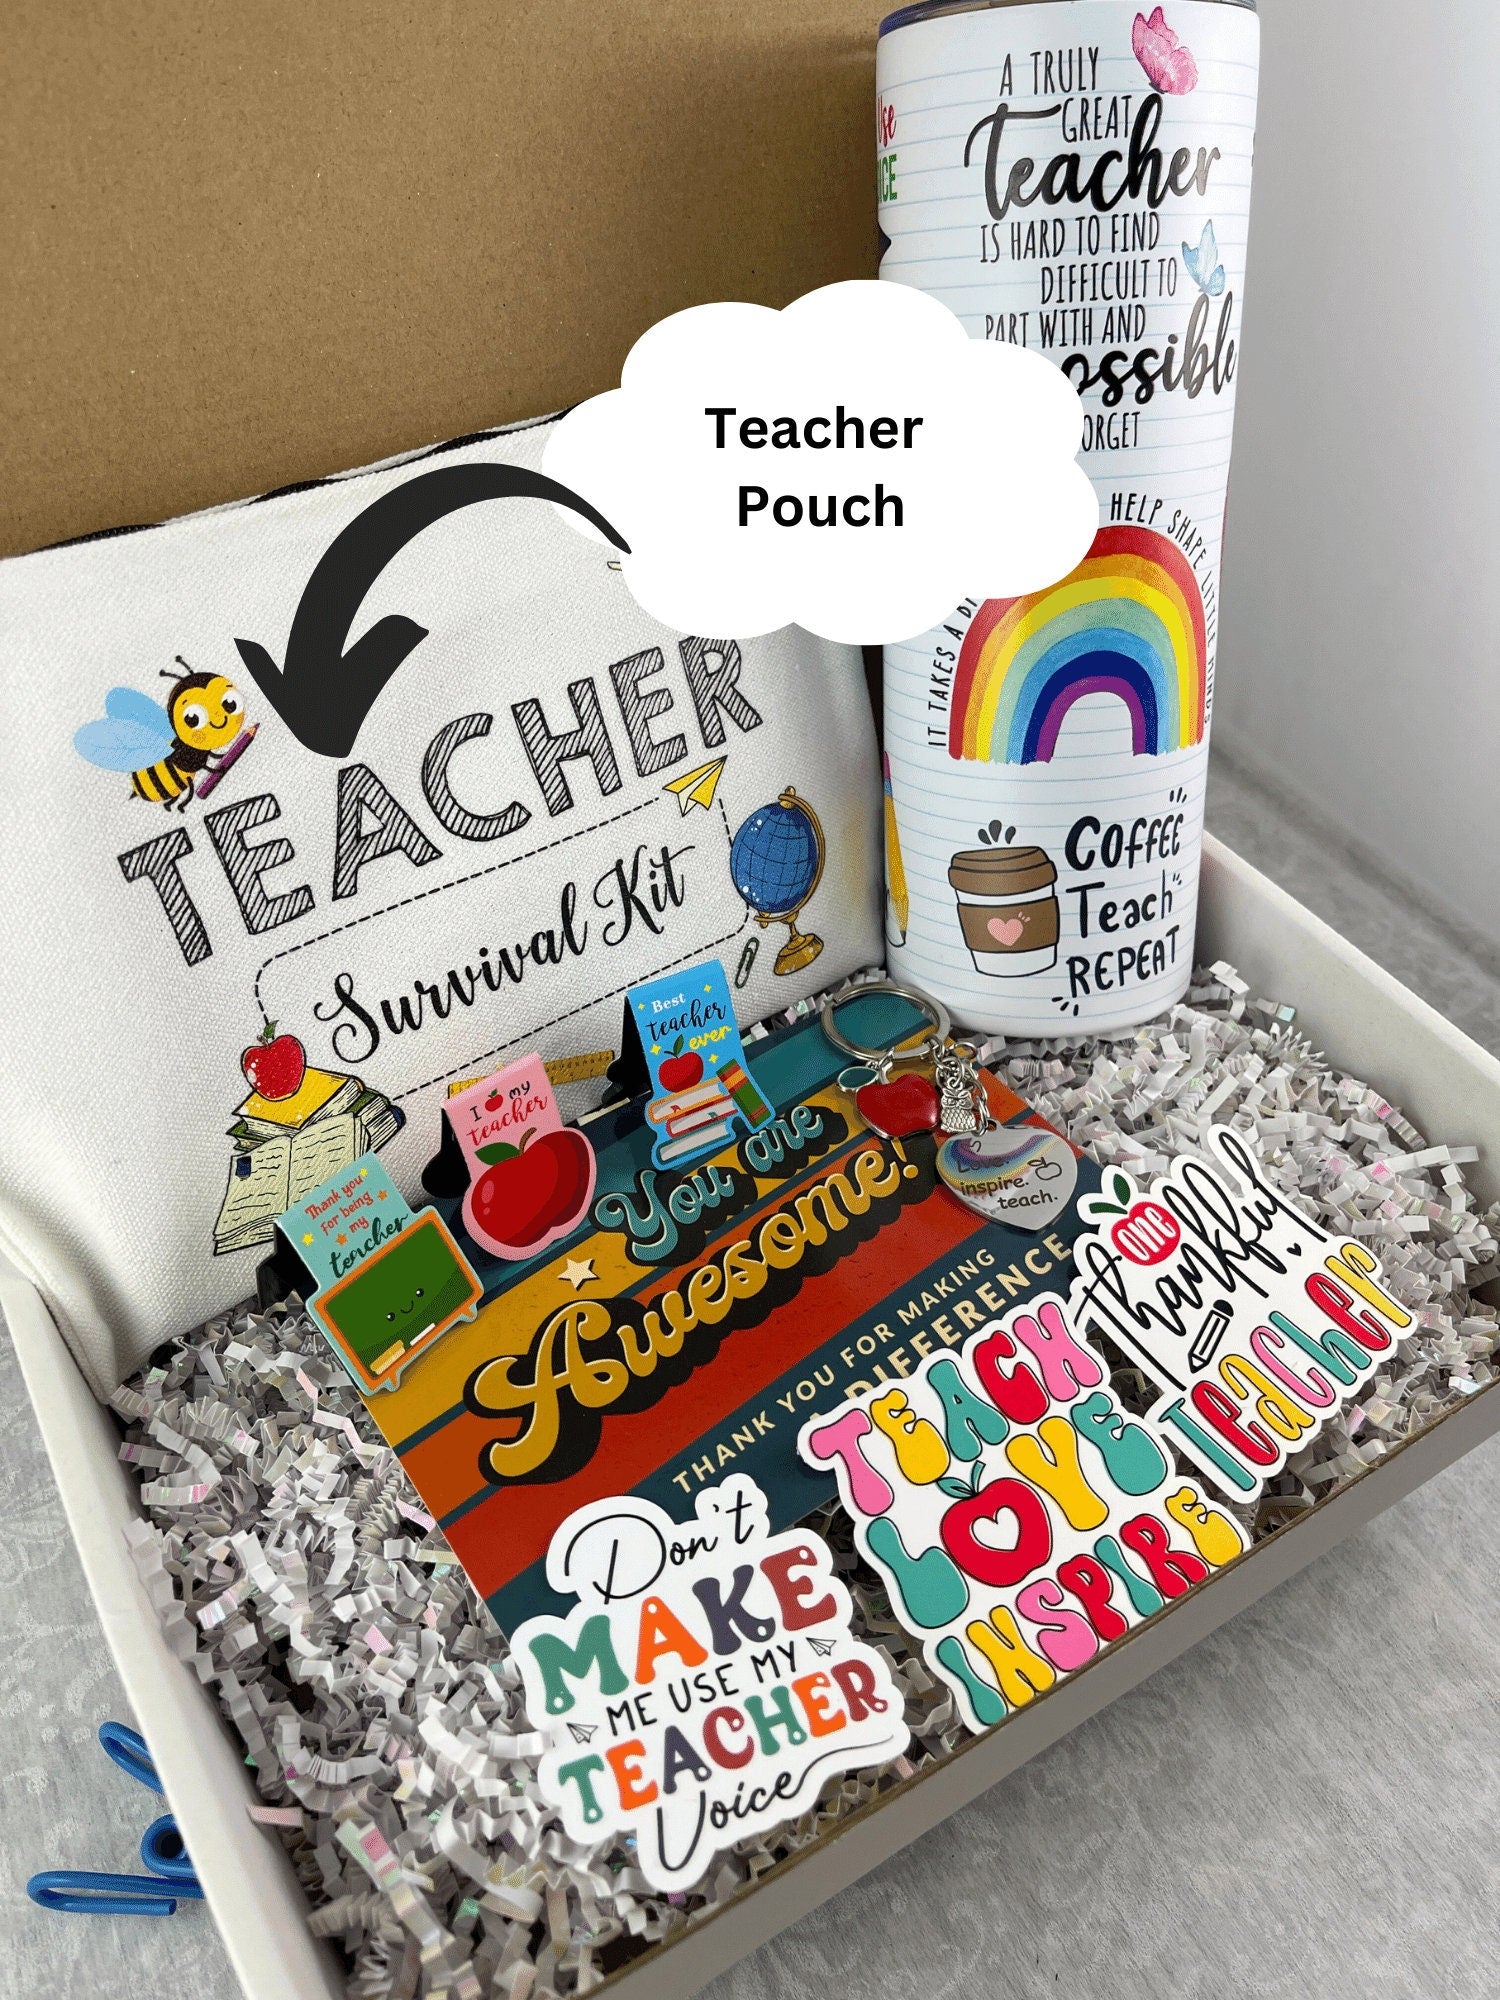 teachers day gift ideas, best teacher gifts, end of year teacher gift ideas,teachers day special gifts, teacher gifts, teacher appreciation week ideas, teacher appreciation gift ideas, teachers day special gifts, Teacher Thank You Gifts, Best Teacher Gift, Thoughtful Teacher Gifts, Personalized Teacher Appreciation Gift, End of Term Gifts for Teachers